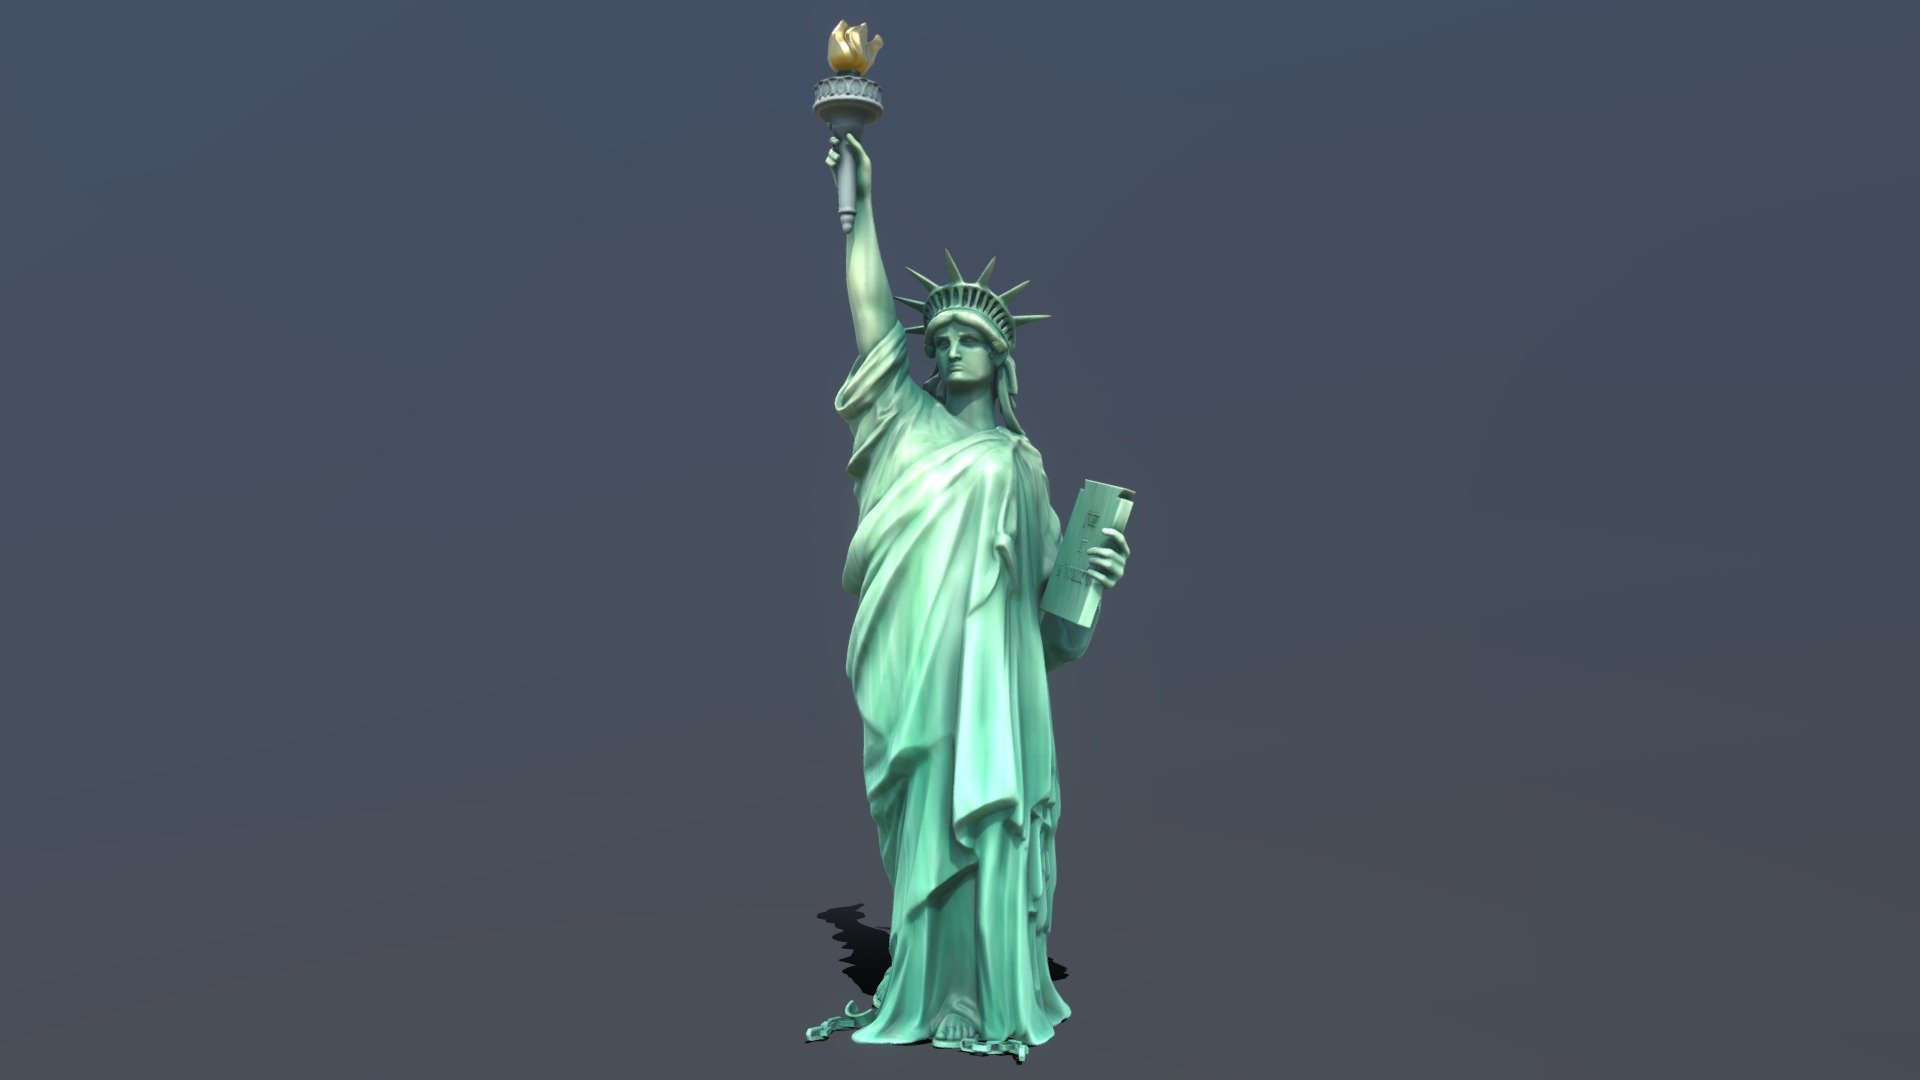 Originally modeled in Cinema 4D R 21



Maps for Statue Of Liberty




BaseColor

Metallic

Roughness

Normal

Emissive

AO



SCALE:
- Model at world center and real scale:
       Metric in centimeter
       1 unit = 1 centimeter



Texture resolution 2048x2048
Texture format PNG



Poly Count :
Polygon Count - 49856
Vertex Count - 99788
No N-Gons - Statue Of Liberty - Buy Royalty Free 3D model by zames1992 3d model